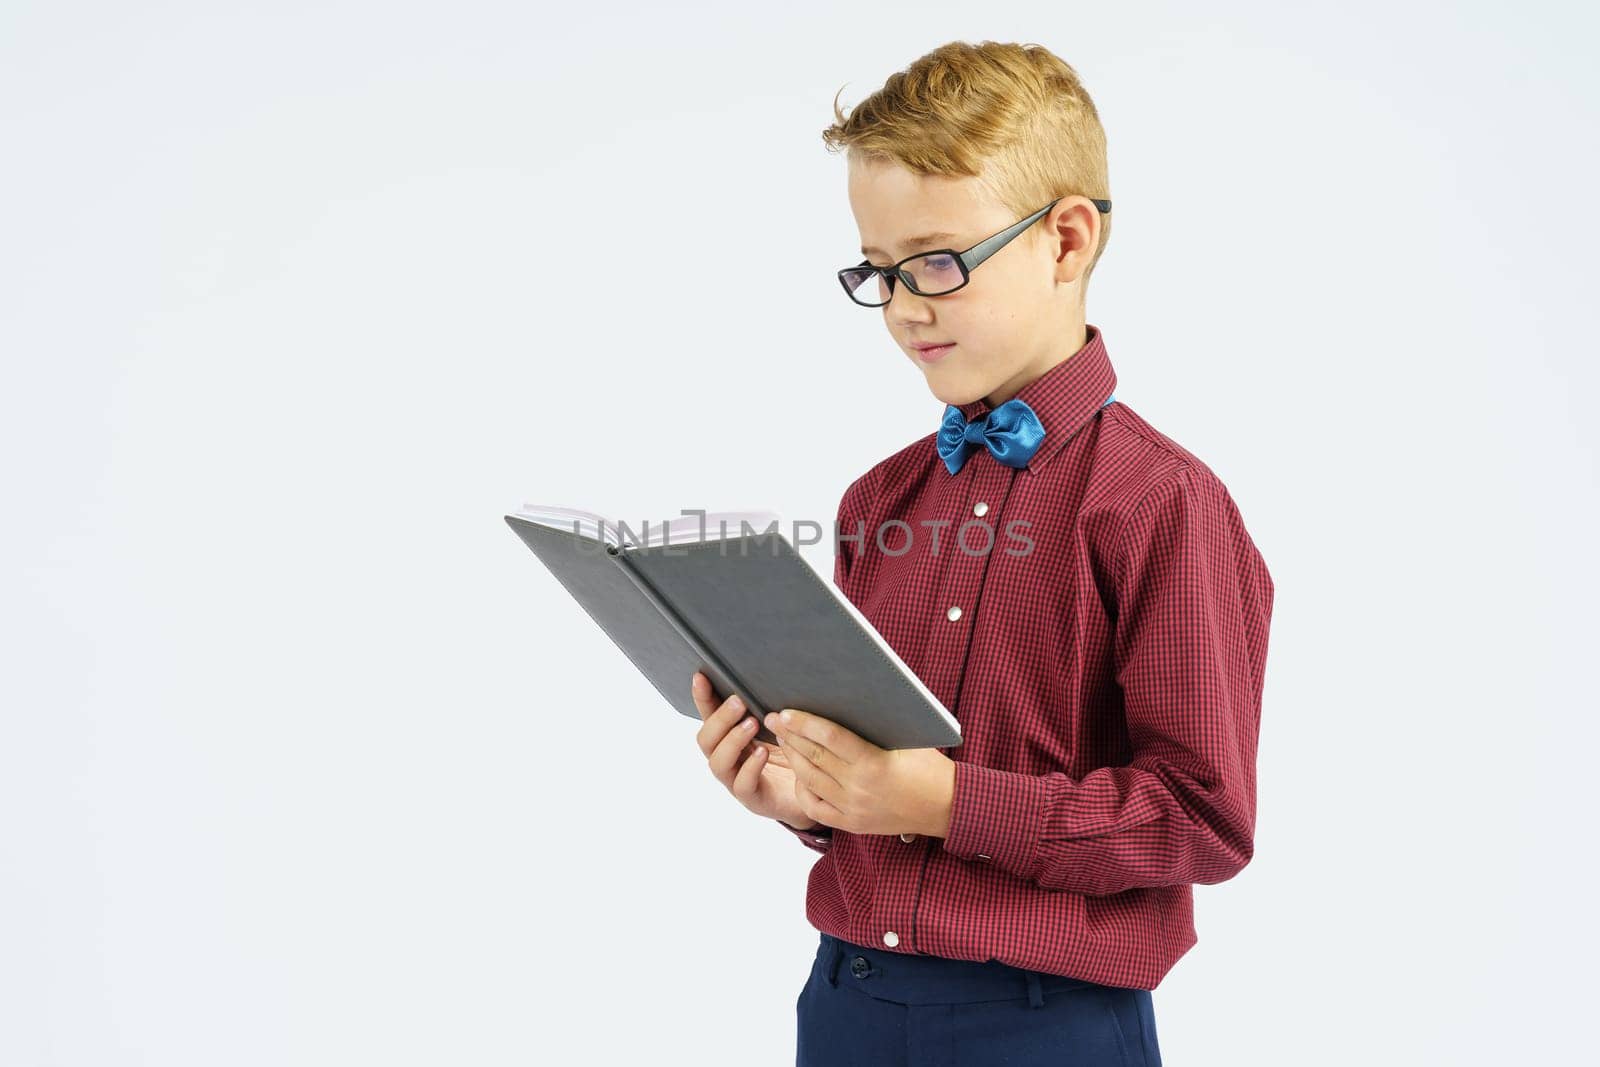 A schoolboy with glasses reads a book he holds in his hands. Isolated background. by Sd28DimoN_1976